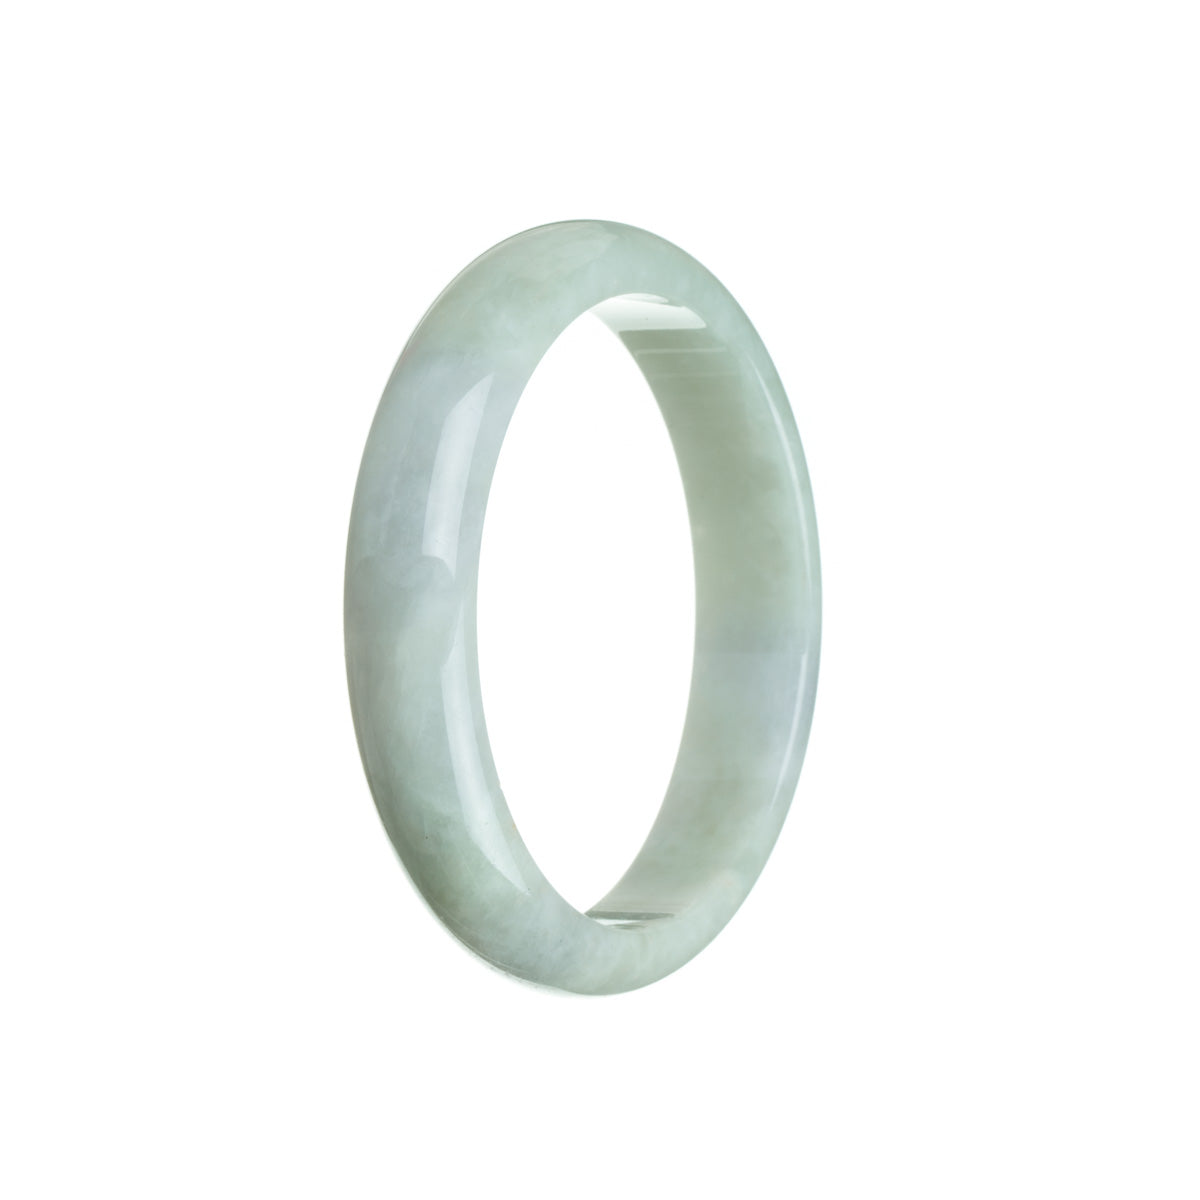 An untreated pale green jade bracelet in a half moon shape, measuring 56mm. A genuine and authentic piece from MAYS GEMS.